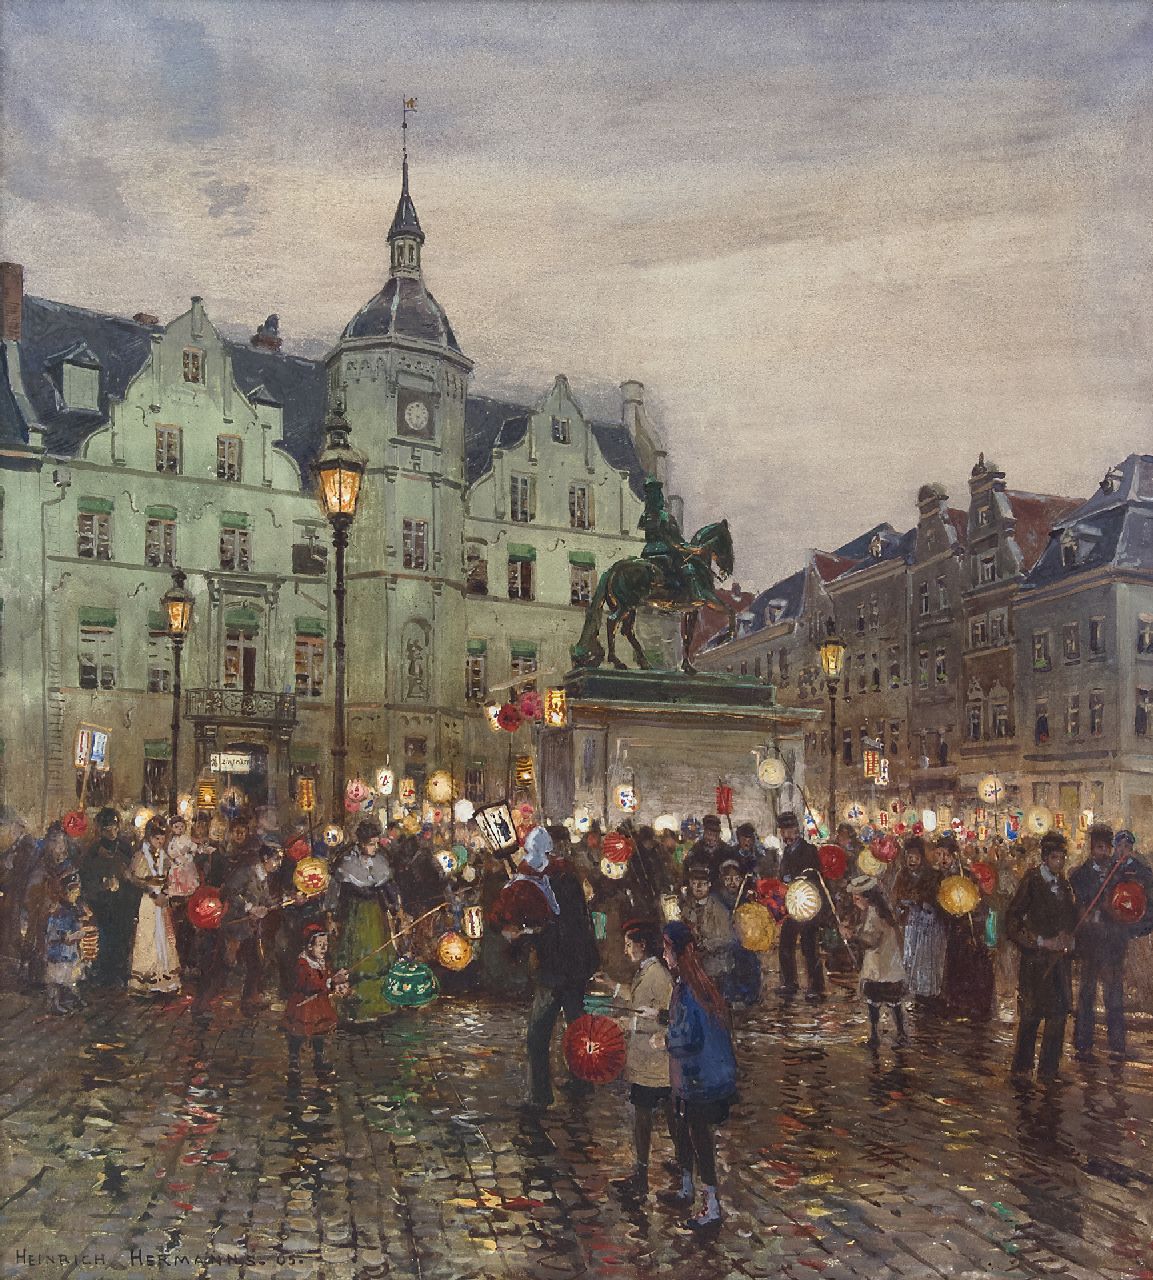 Hermanns H.  | Heinrich Hermanns, Saint Martin procession in front of the Düsseldorf town hall, watercolour and gouache on paper 58.2 x 52.3 cm, signed l.l. and dated '05